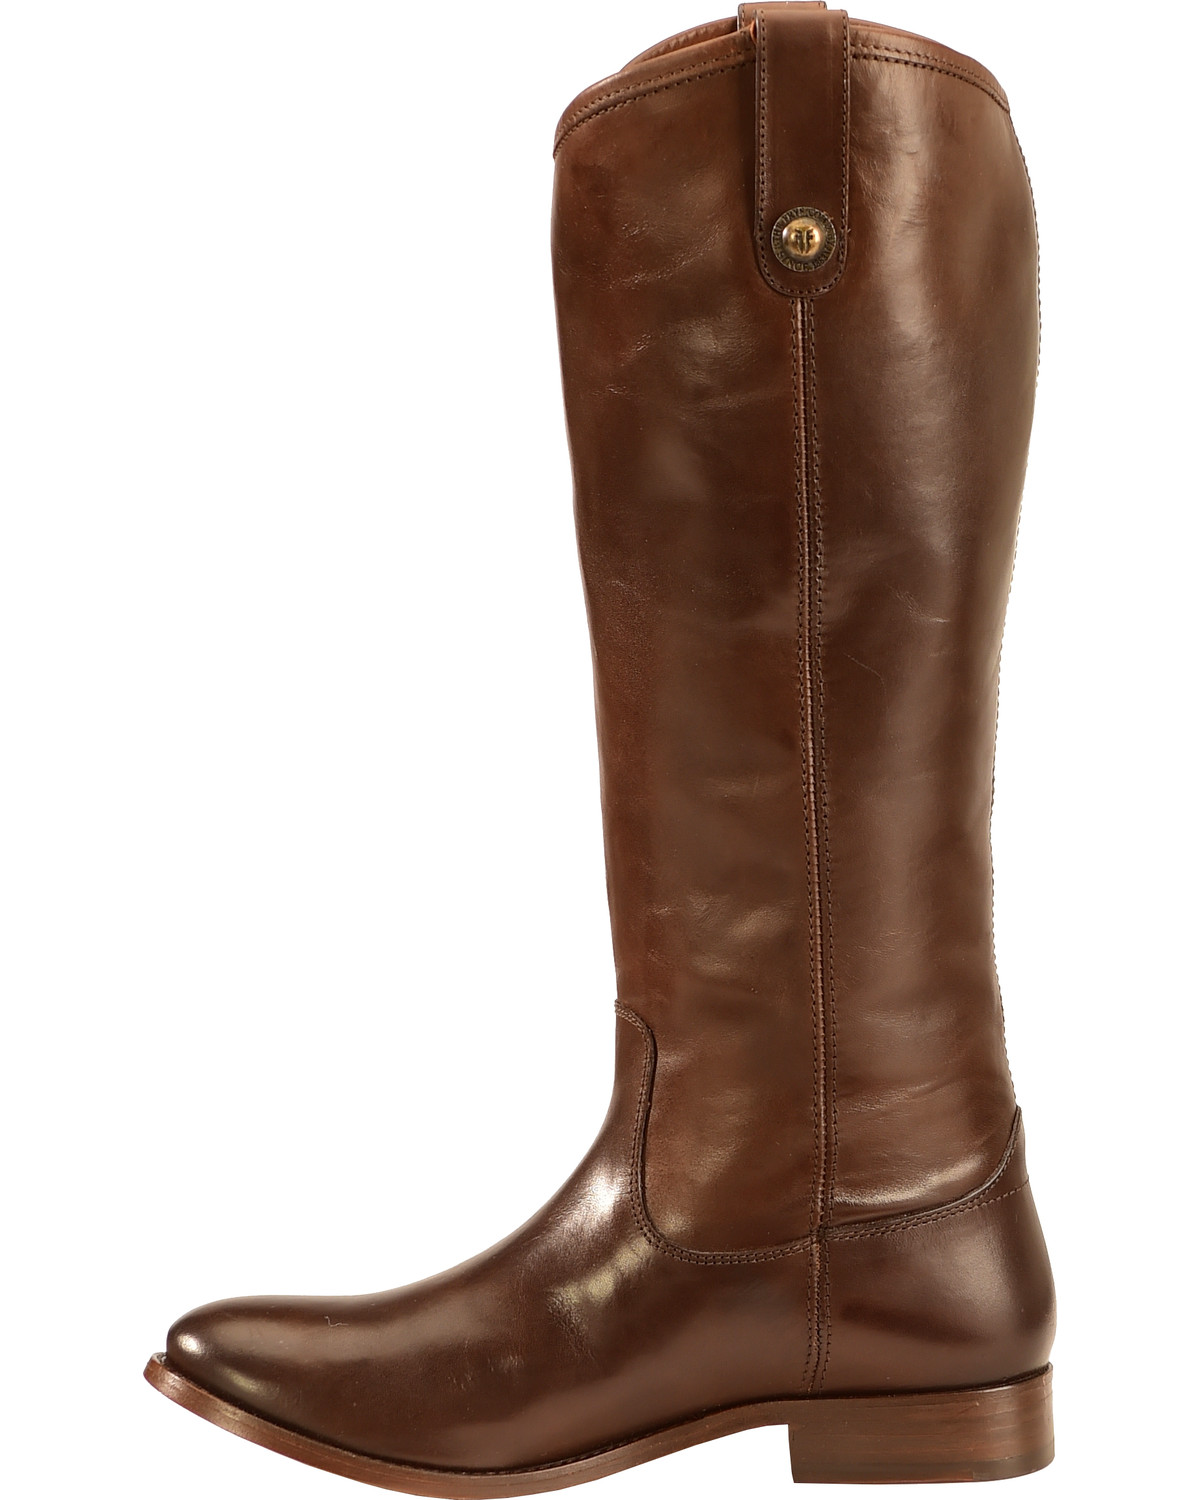 Frye Women's Melissa Button Riding Boots - Country Outfitter